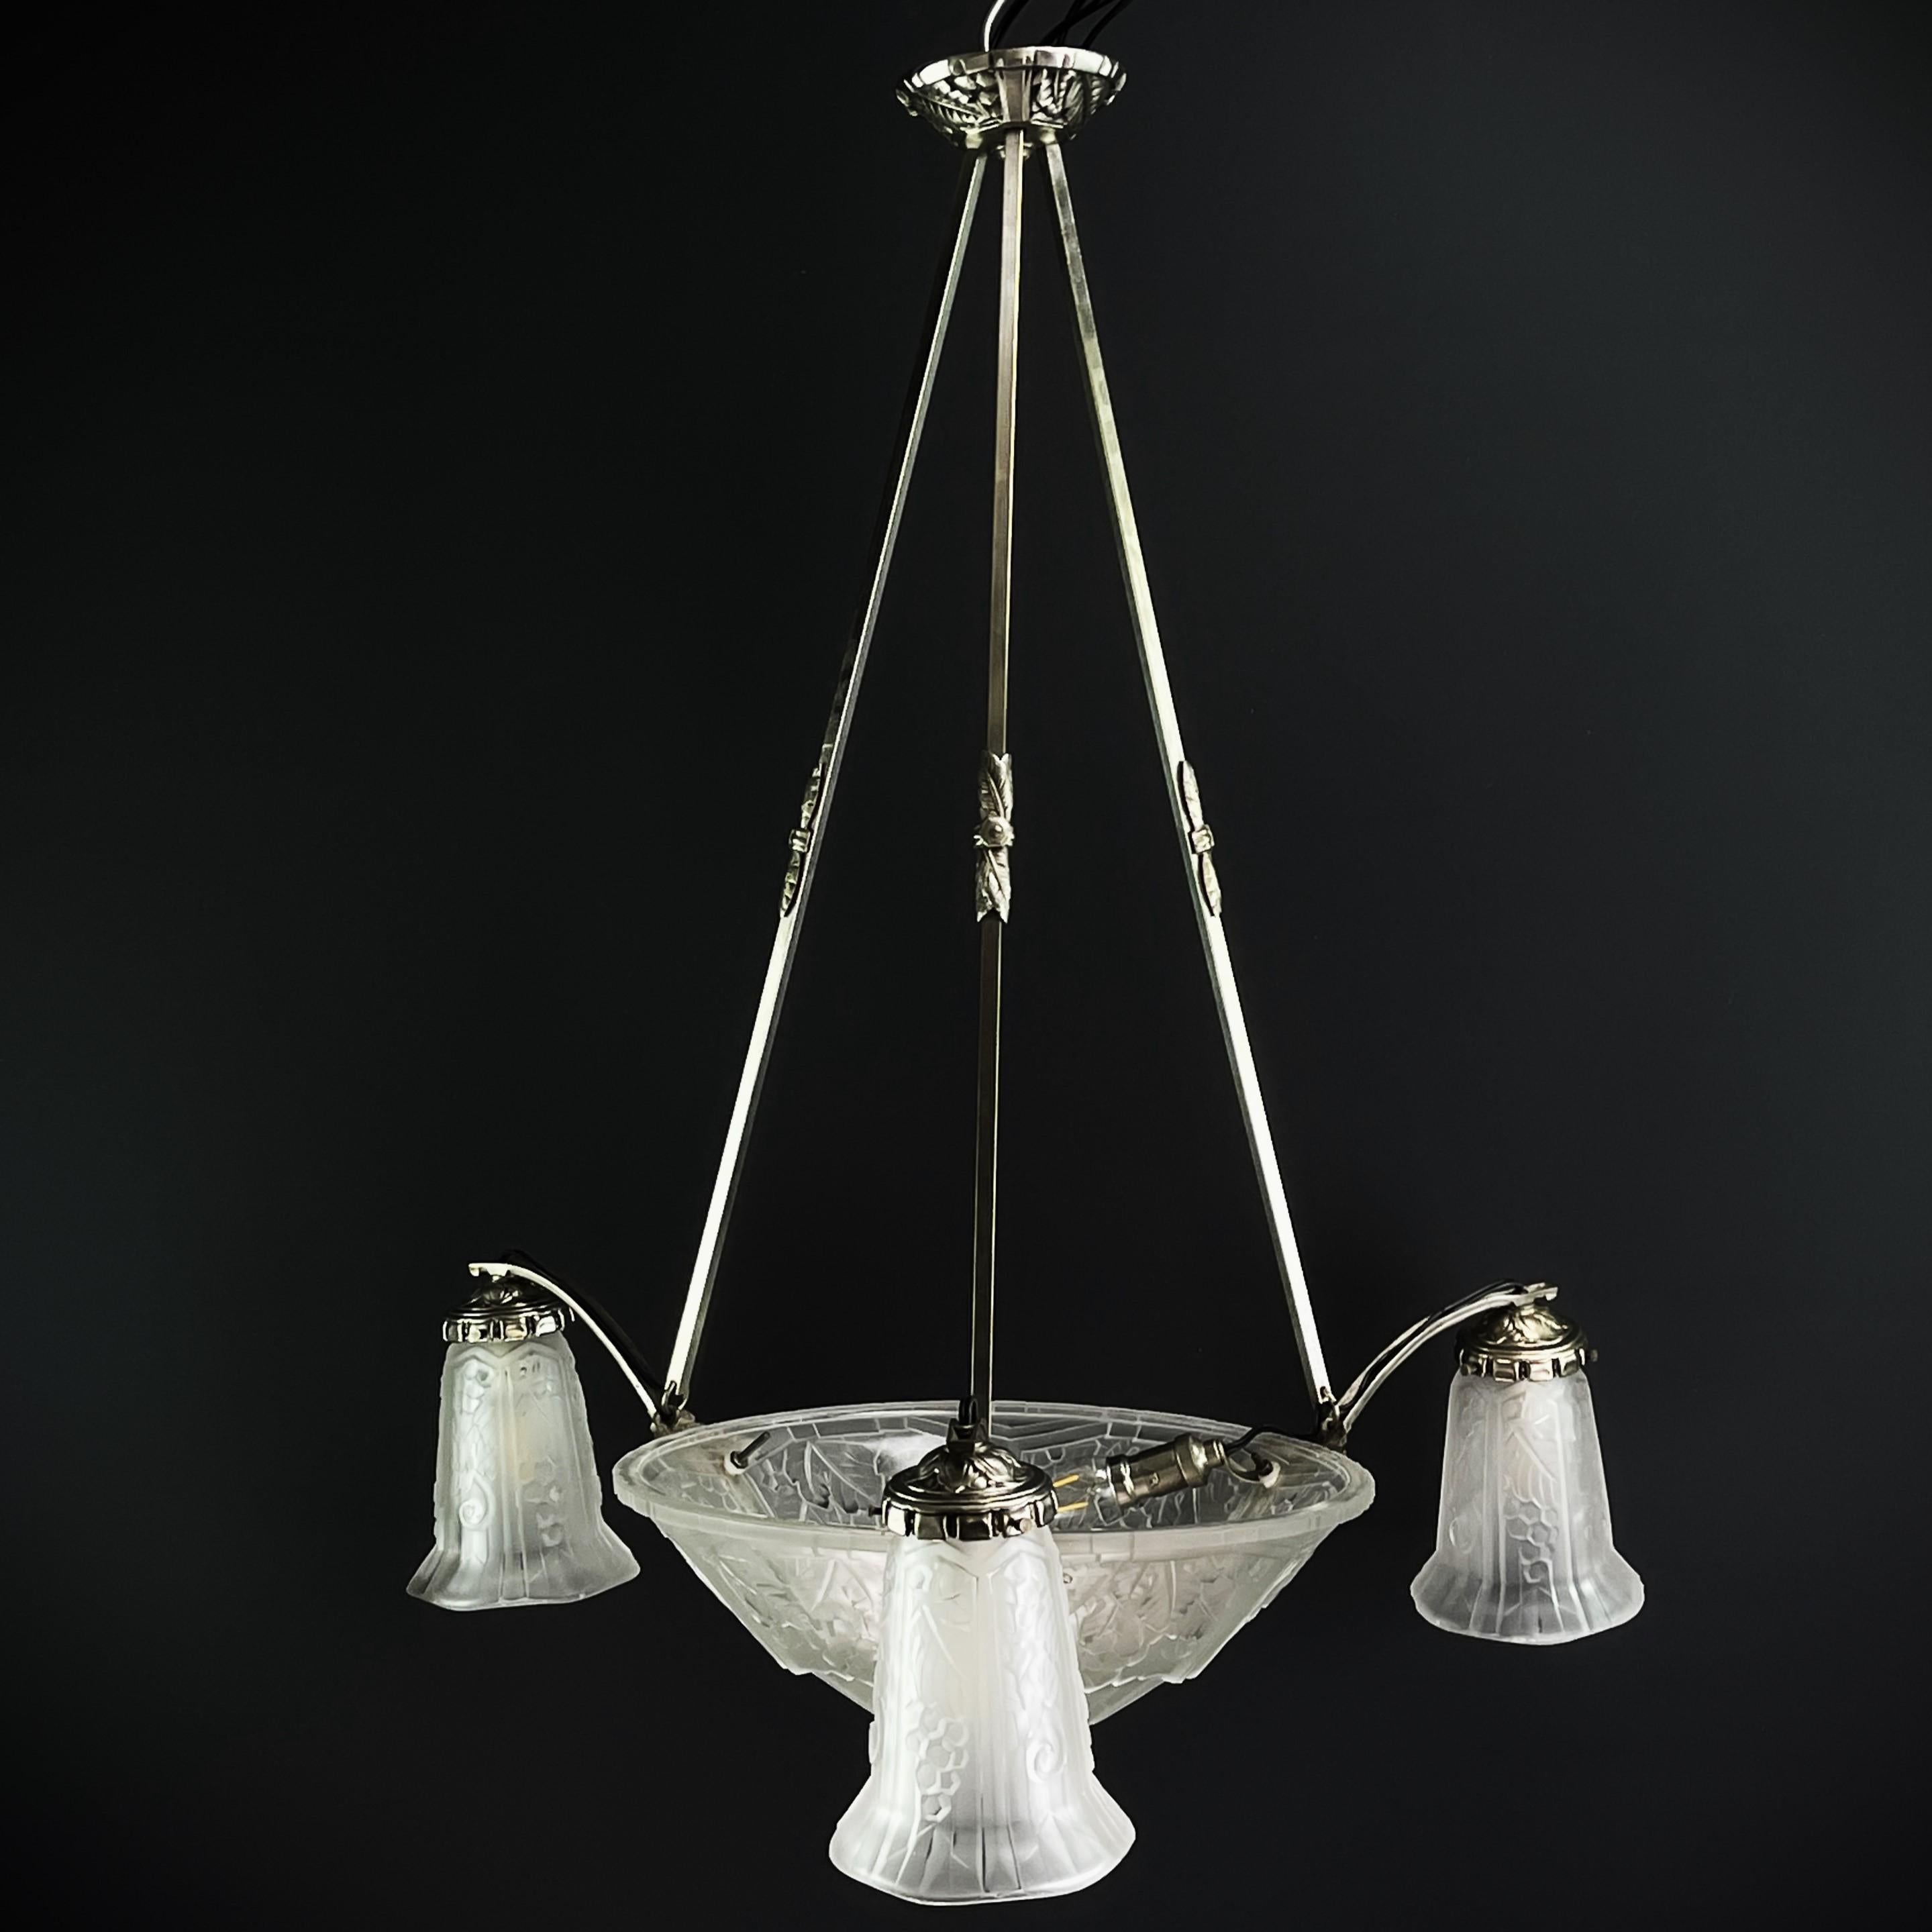 Metal ART DECO Chandelier by P. Mayndiere, nickel-plated, 1930s